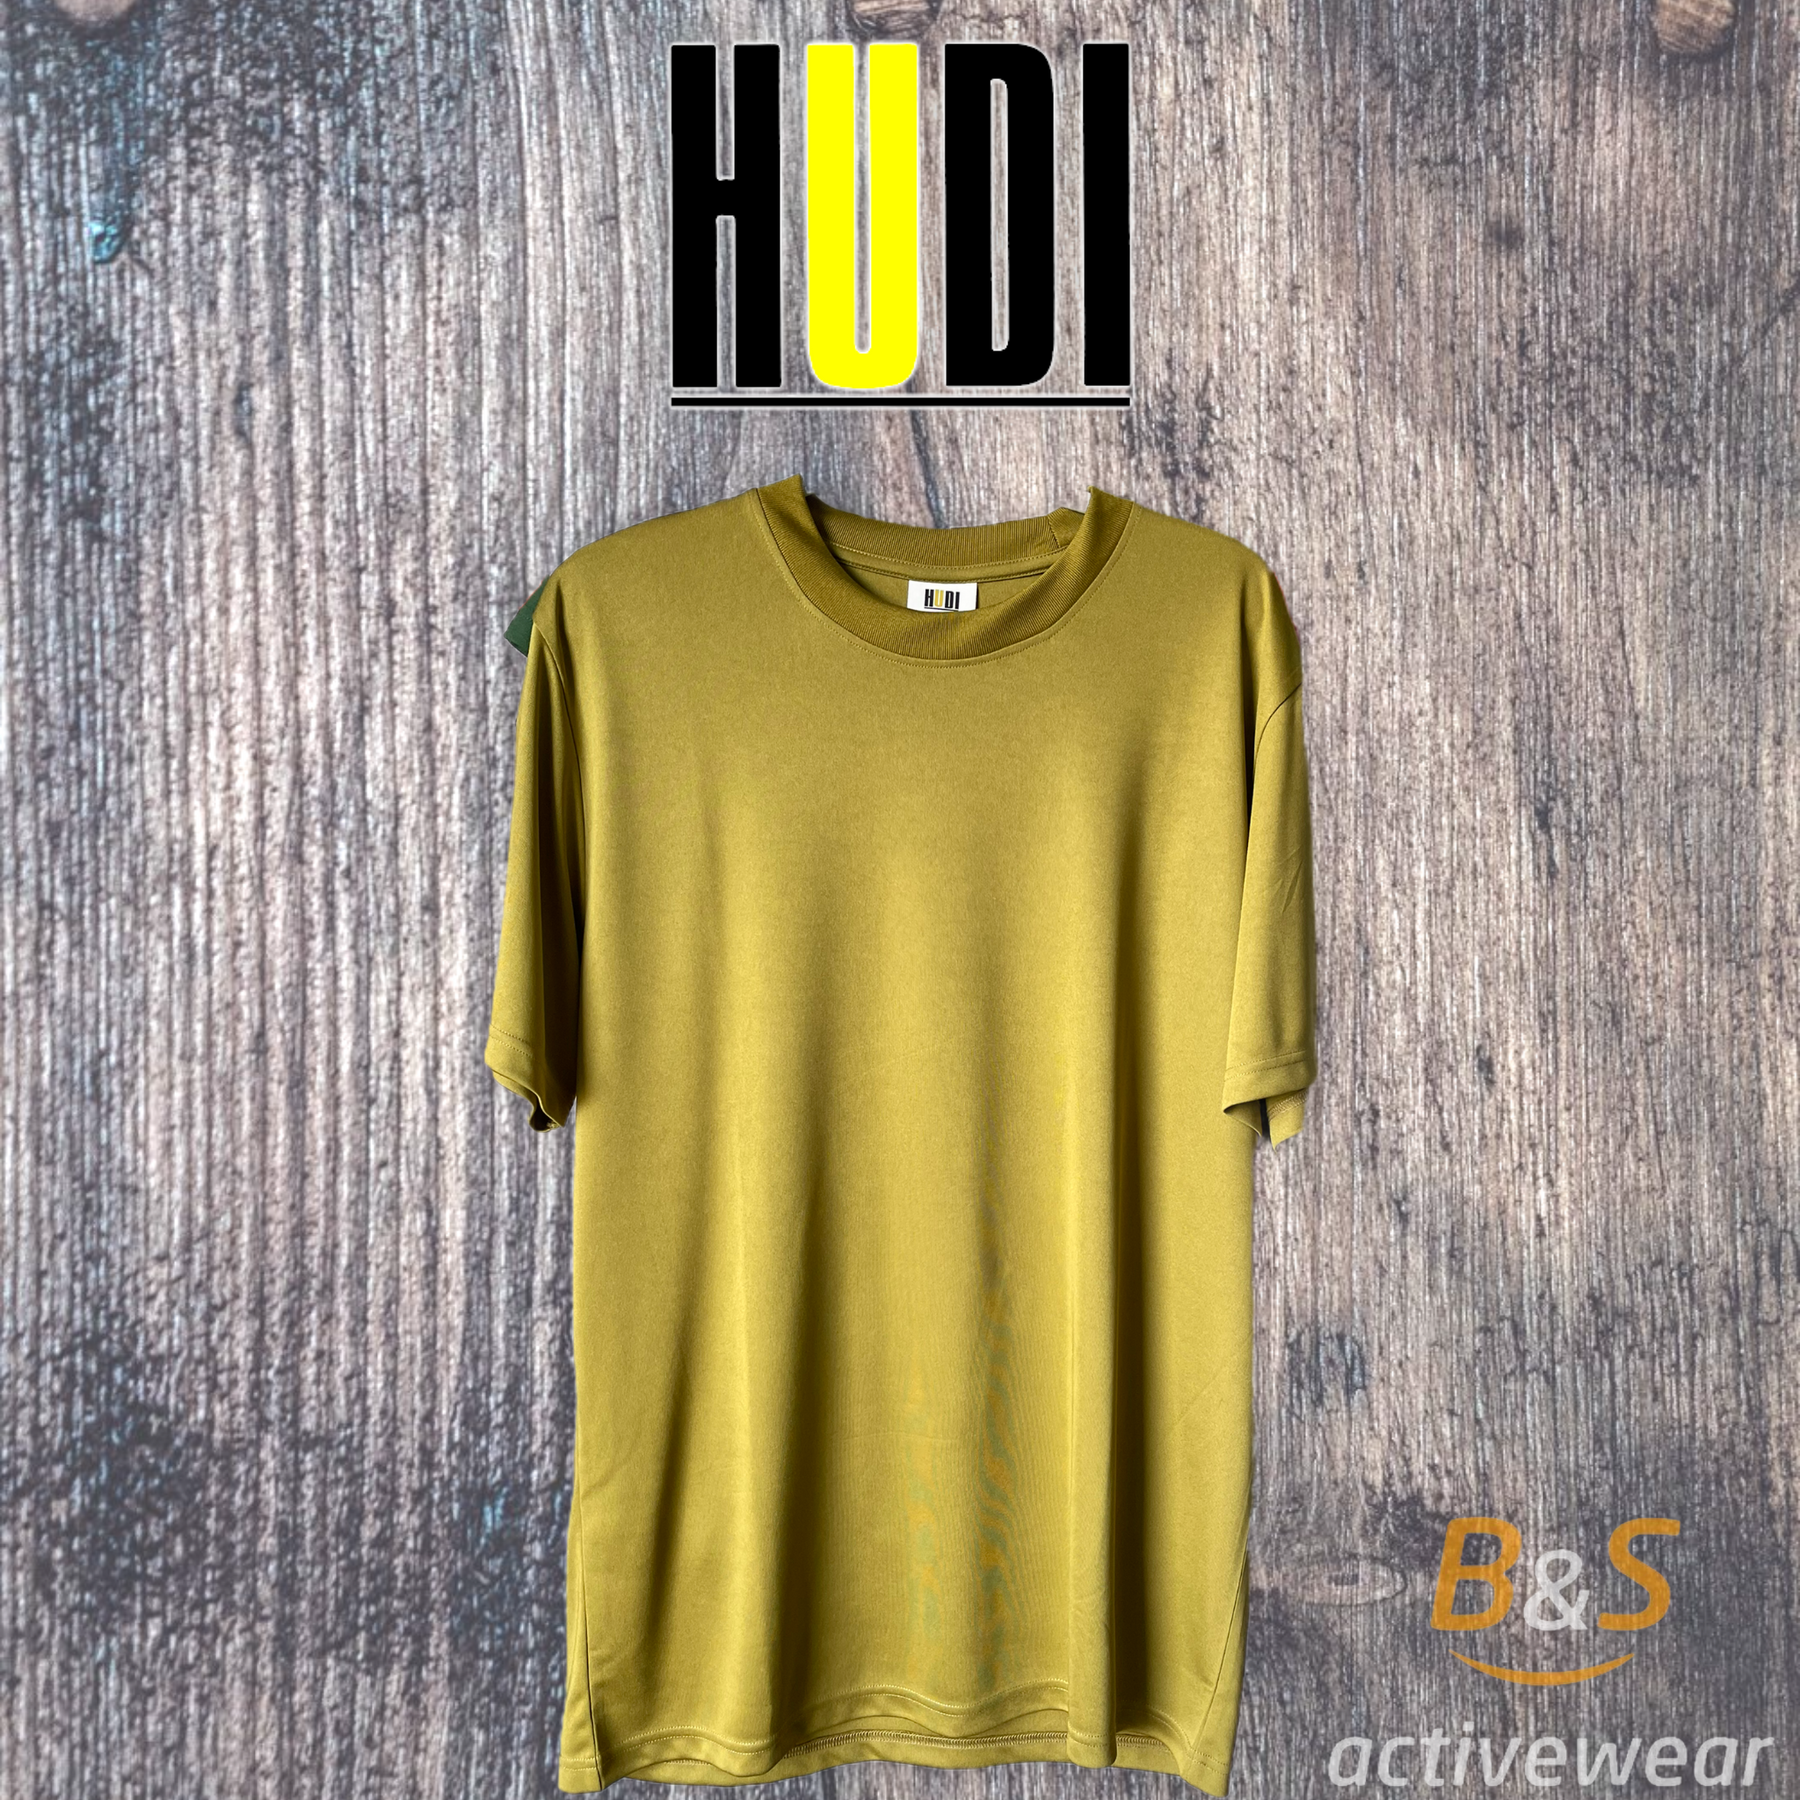 JIOEEH Sweatshirts for Men,Solid Color Tshirts Men,Olive Shirts for  Men,Clearance Items Under 1.00,Yellow Striped Shirt,Men t Shirts Pack,Men's  Yellow Summer Shirt : Clothing, Shoes & Jewelry 